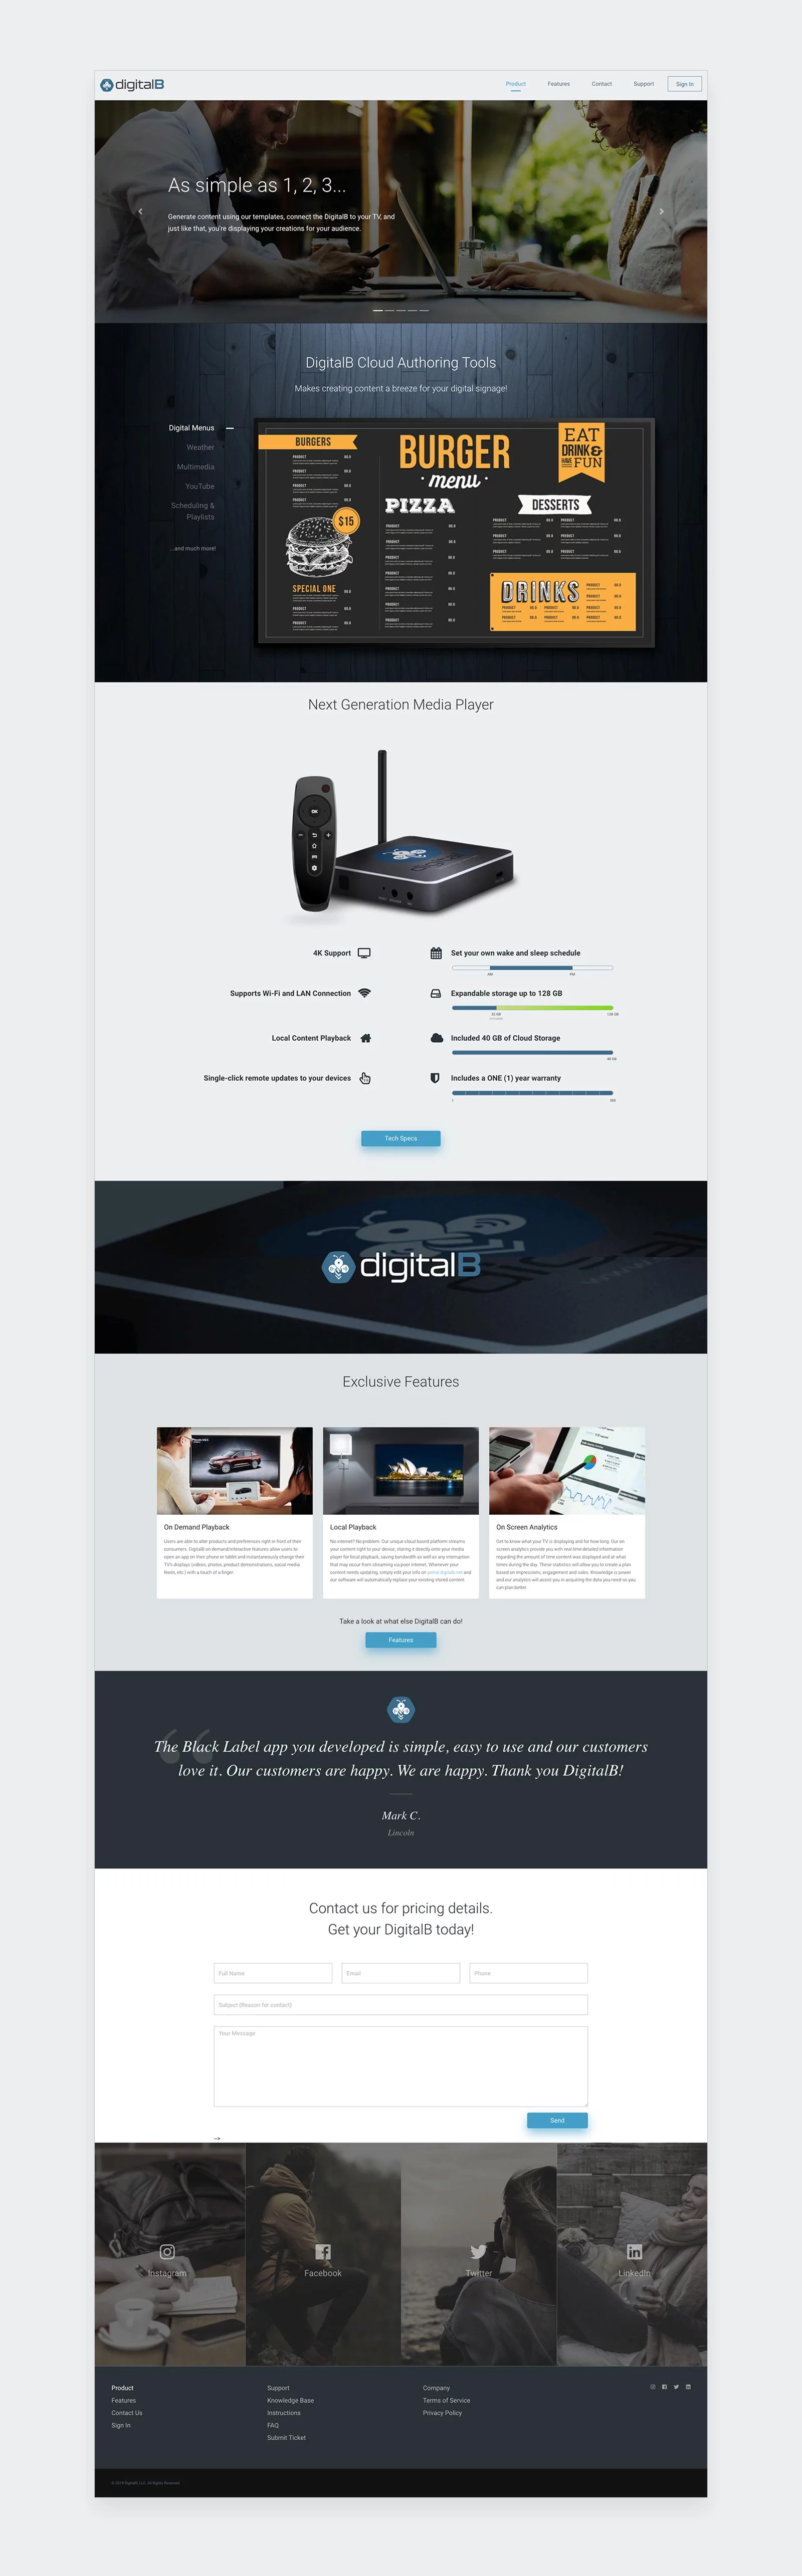 DigitalB Product Website - Full page view of the home page